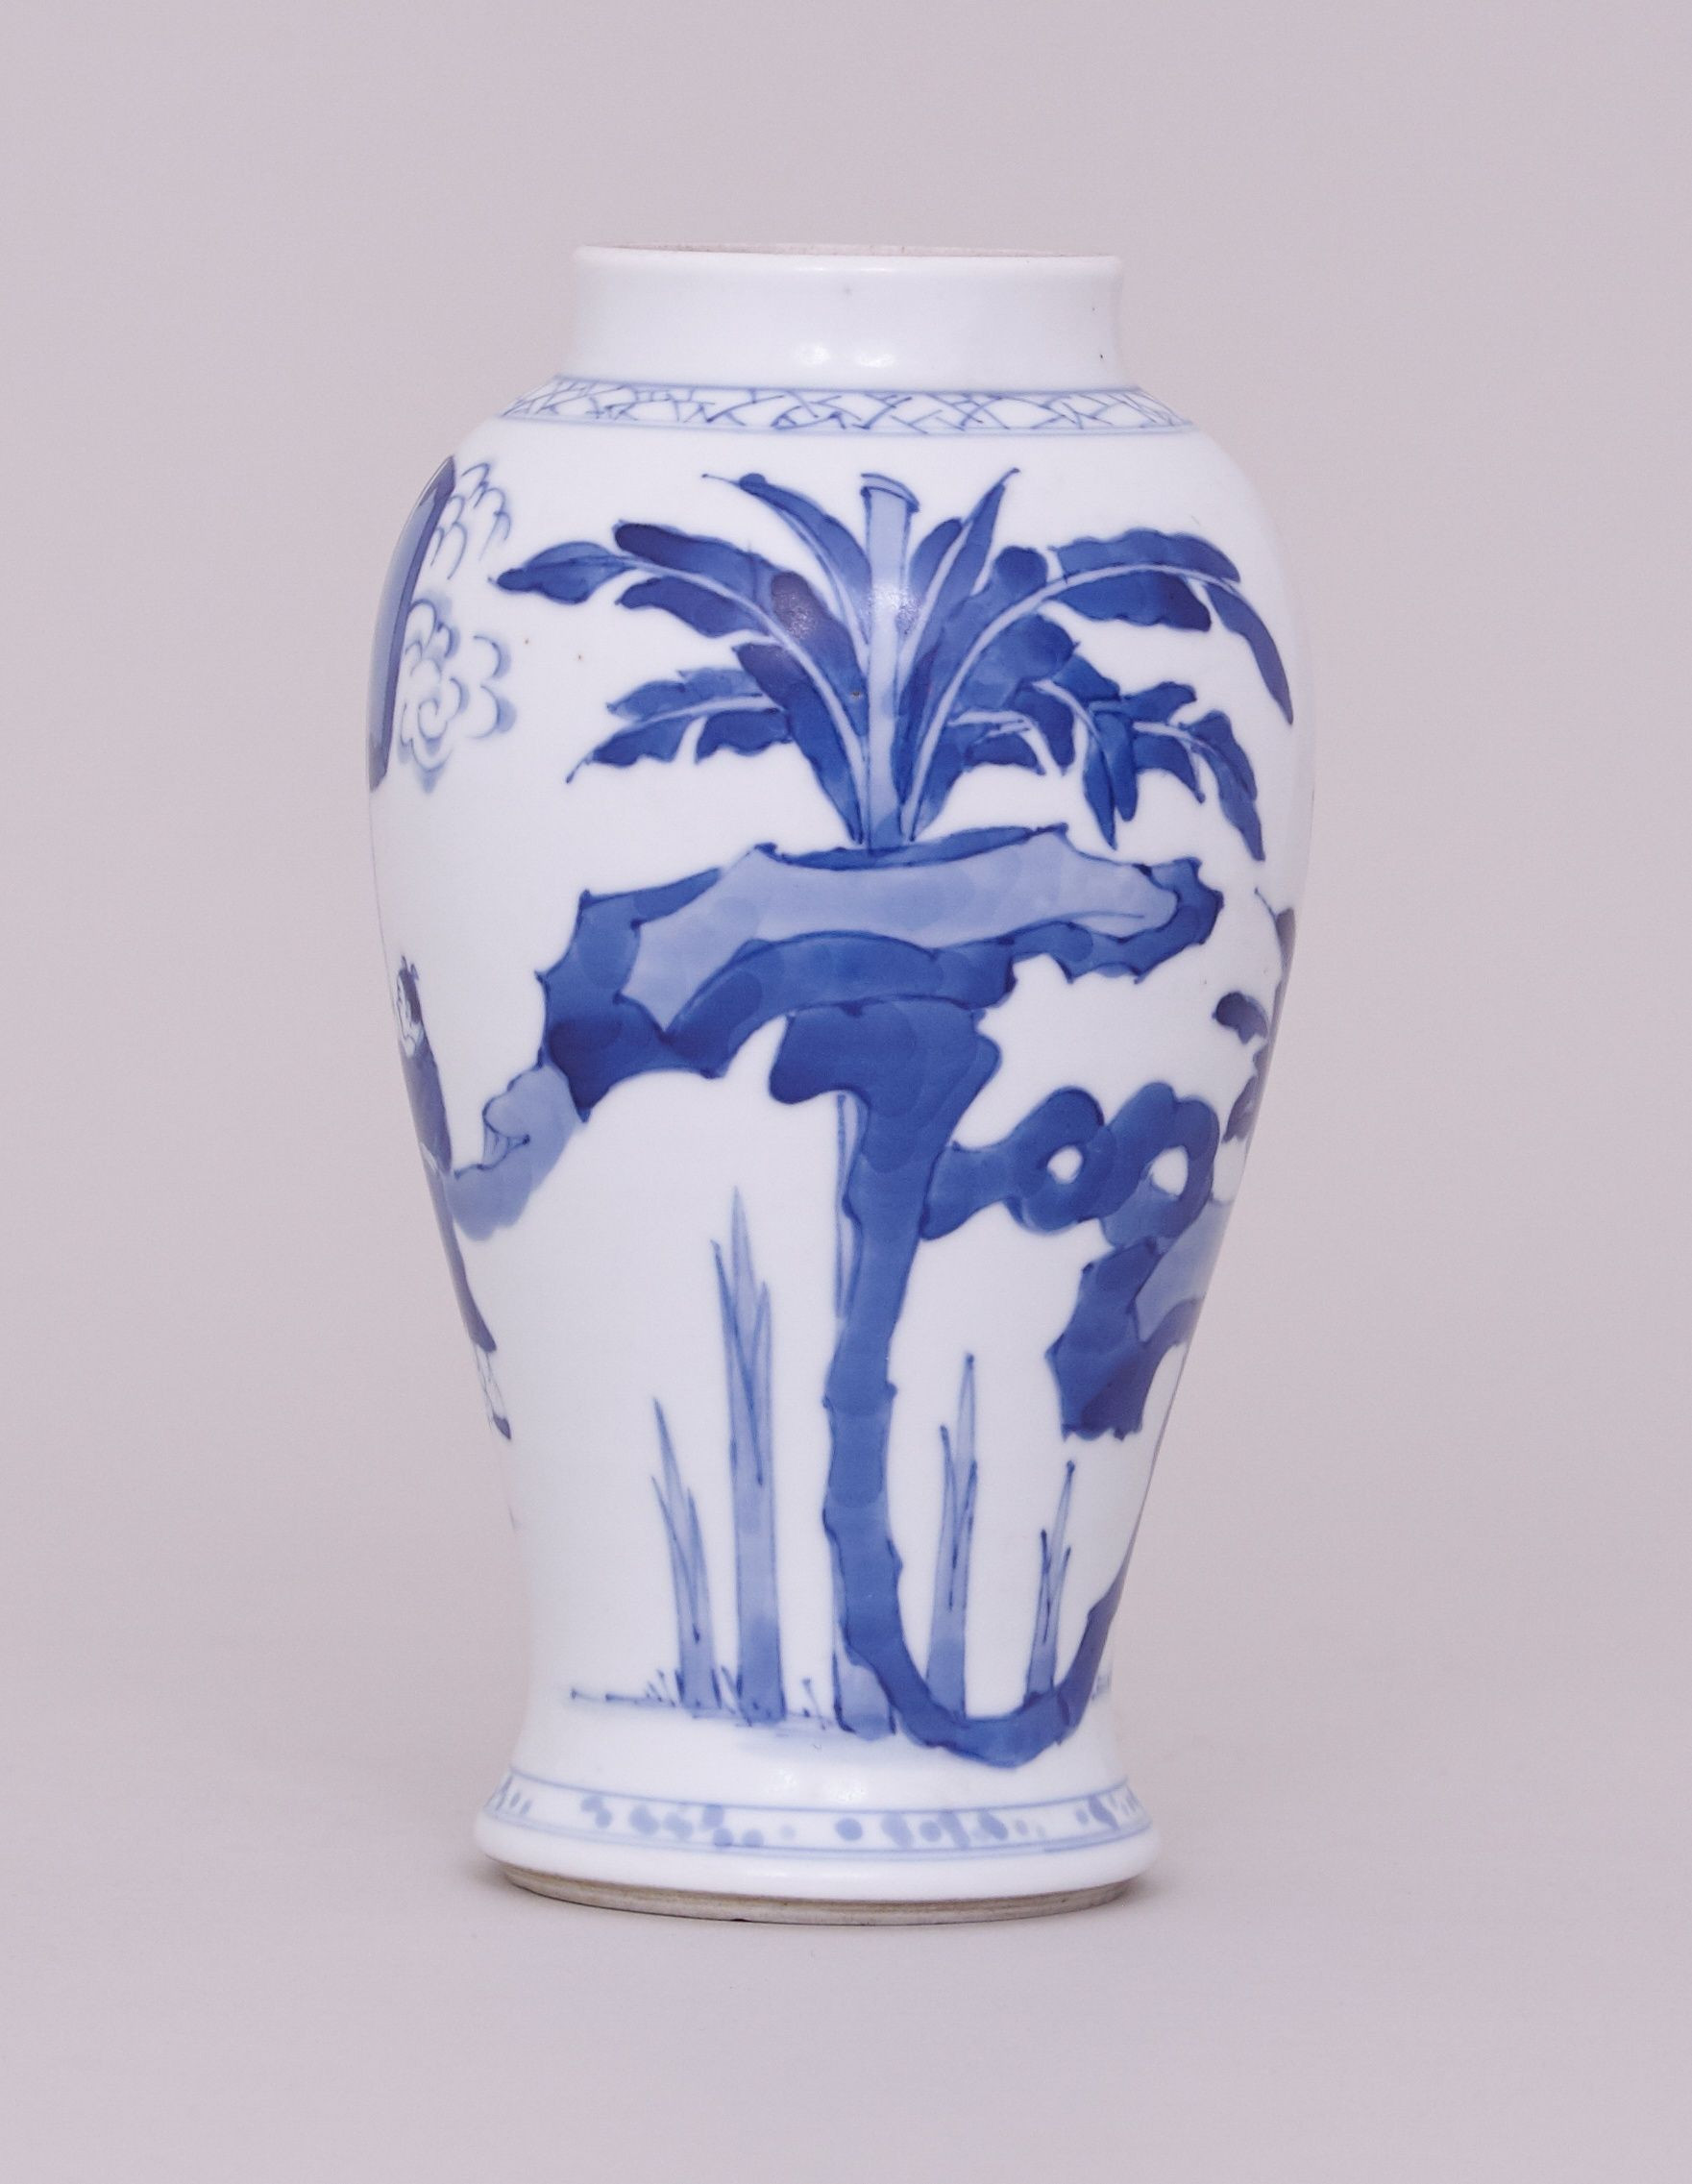 26 Unique Tall Blue White Vase 2024 free download tall blue white vase of blue white vase lovely a chinese blue and white vase kangxi 1662 with blue white vase lovely a chinese blue and white vase kangxi 1662 1722